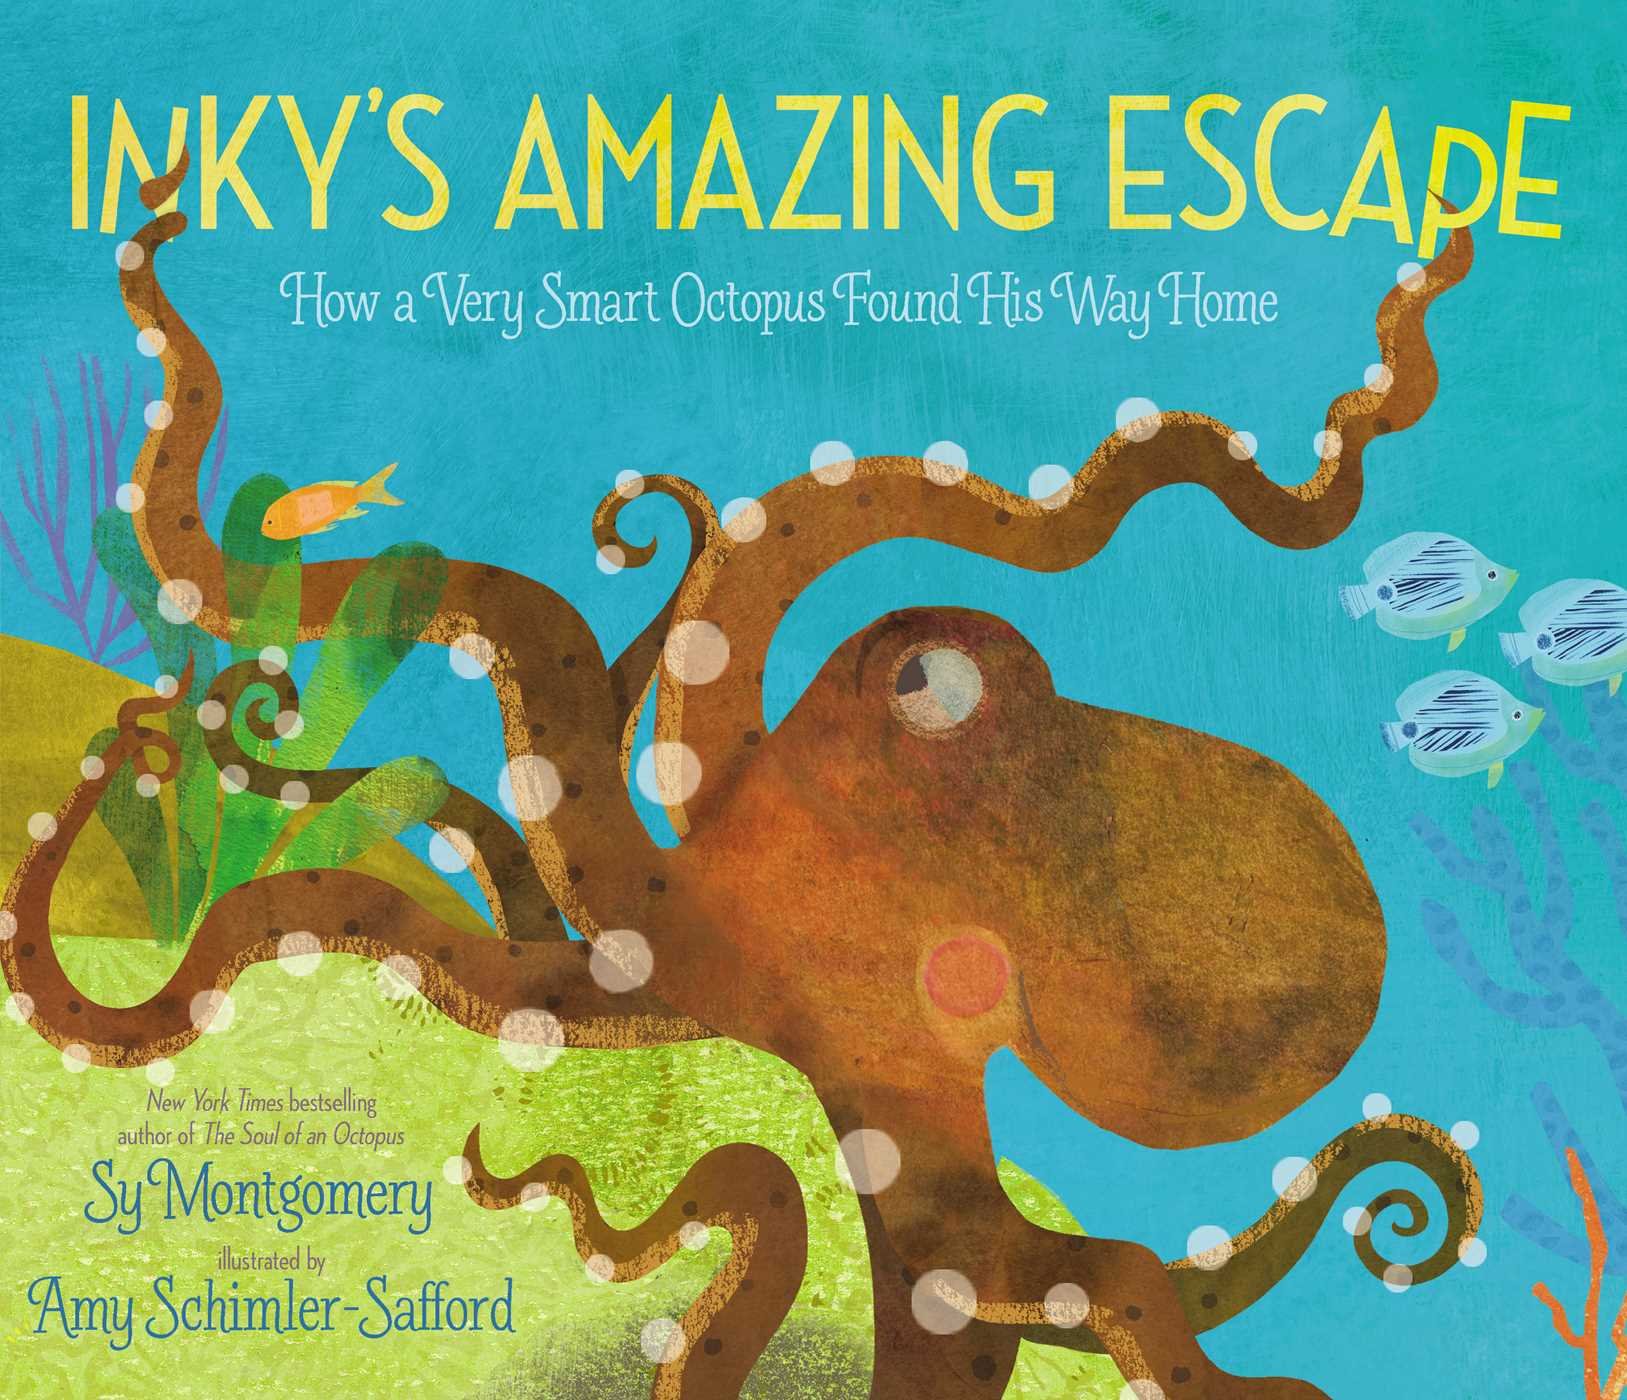 speech and language teaching concepts for Inky's Amazing Escape in speech therapy